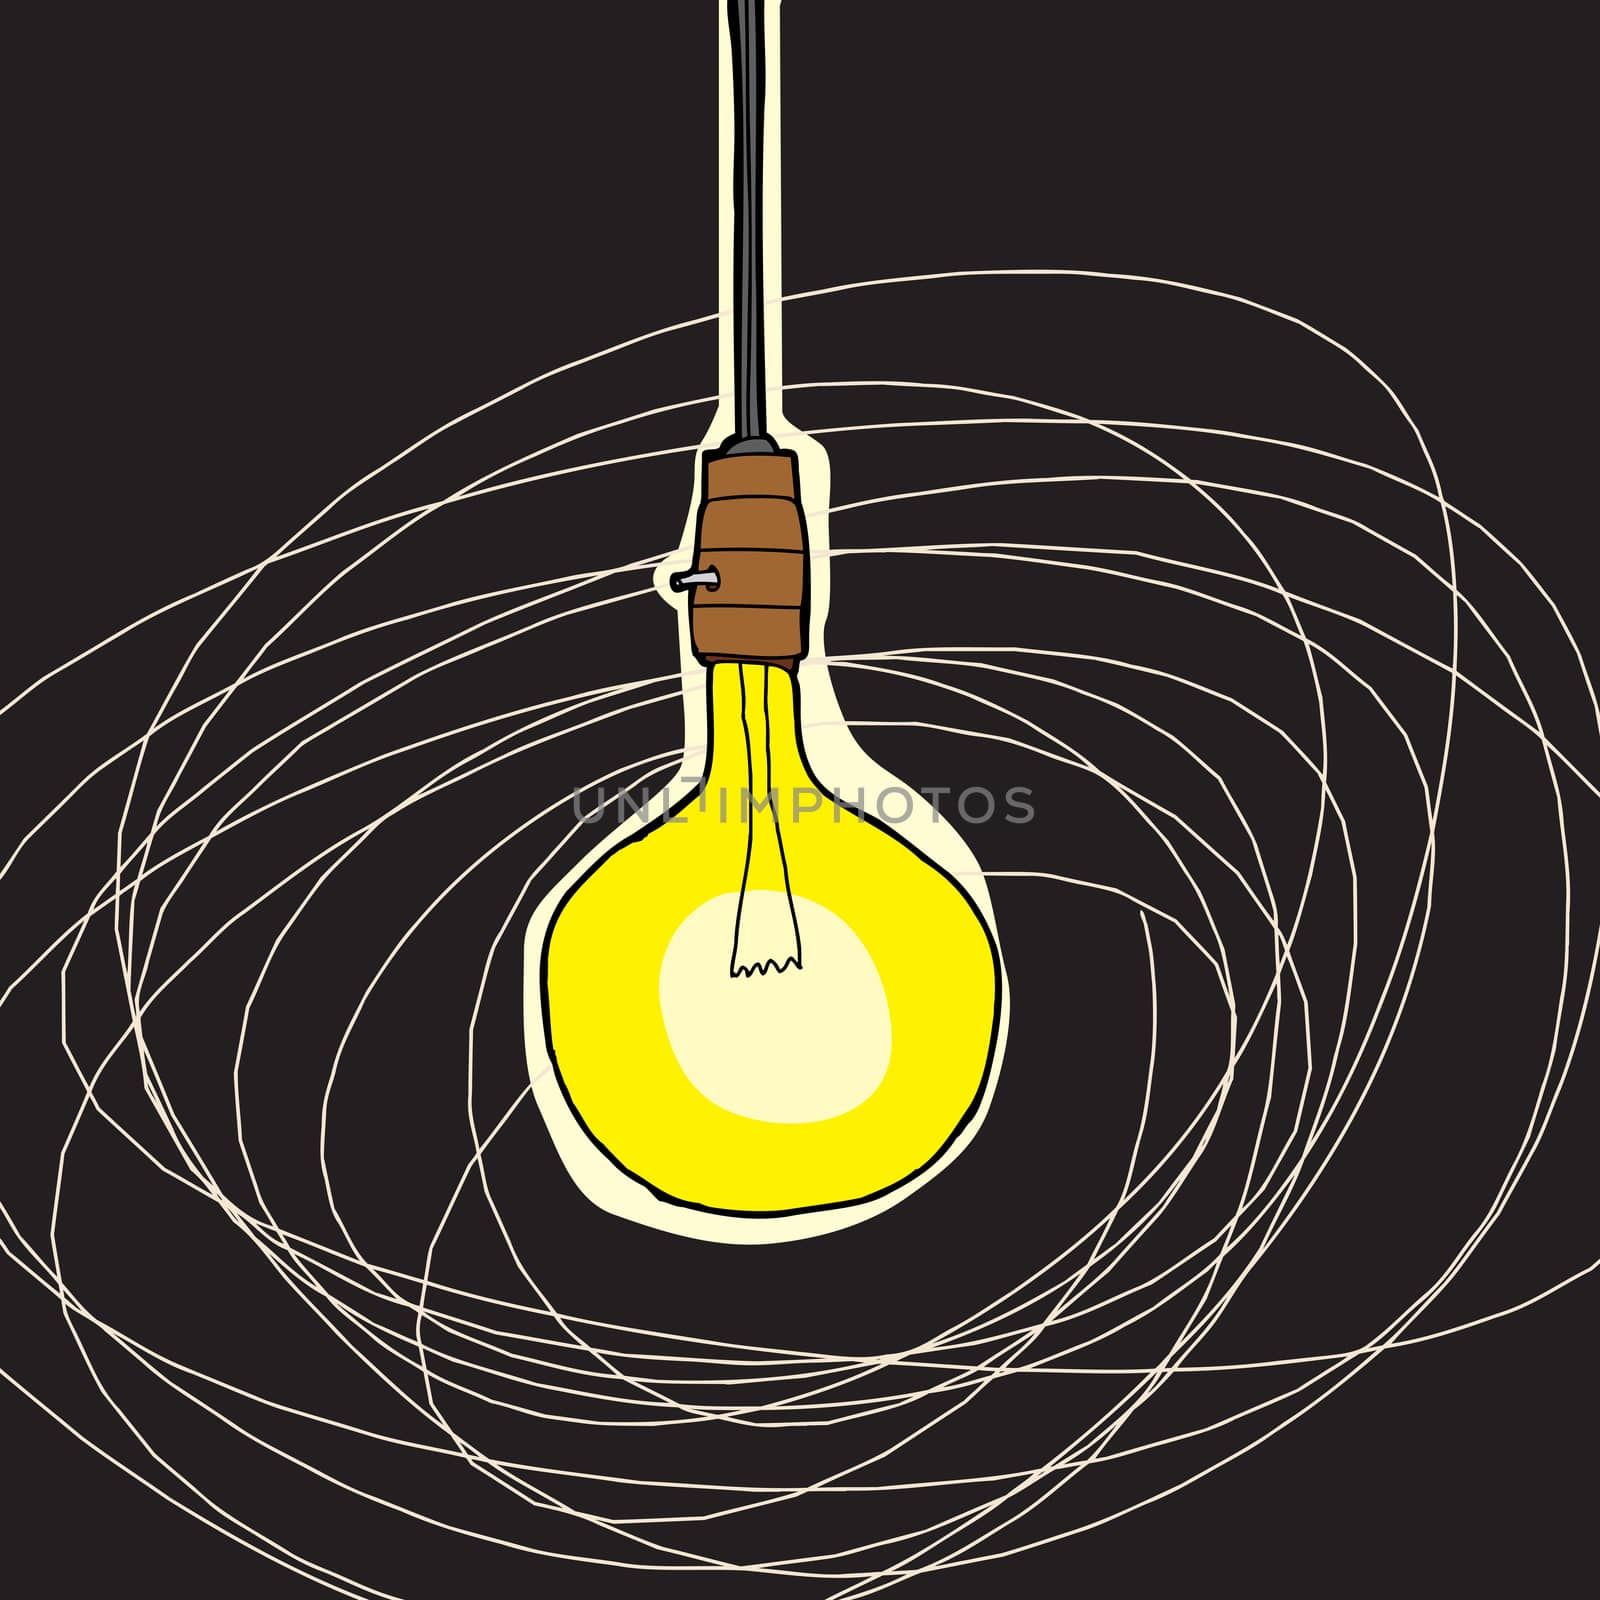 Abstract cartoon of bare bulb lamp over black background